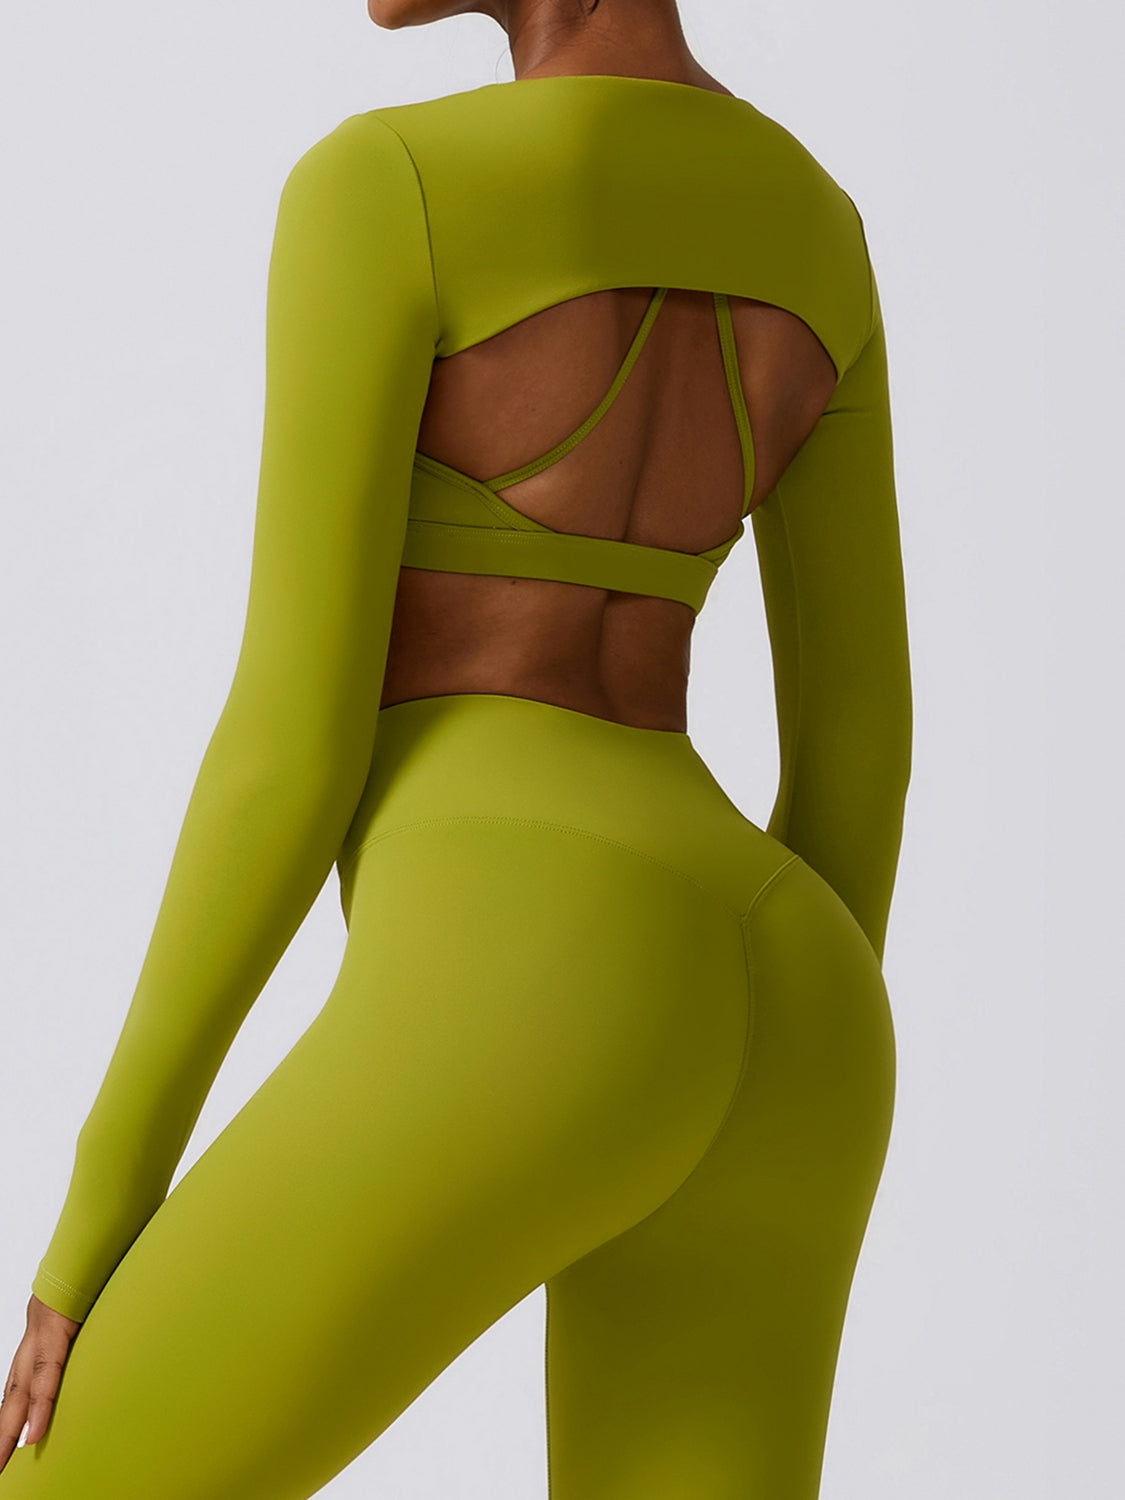 a woman in a green bodysuit with a cut out back